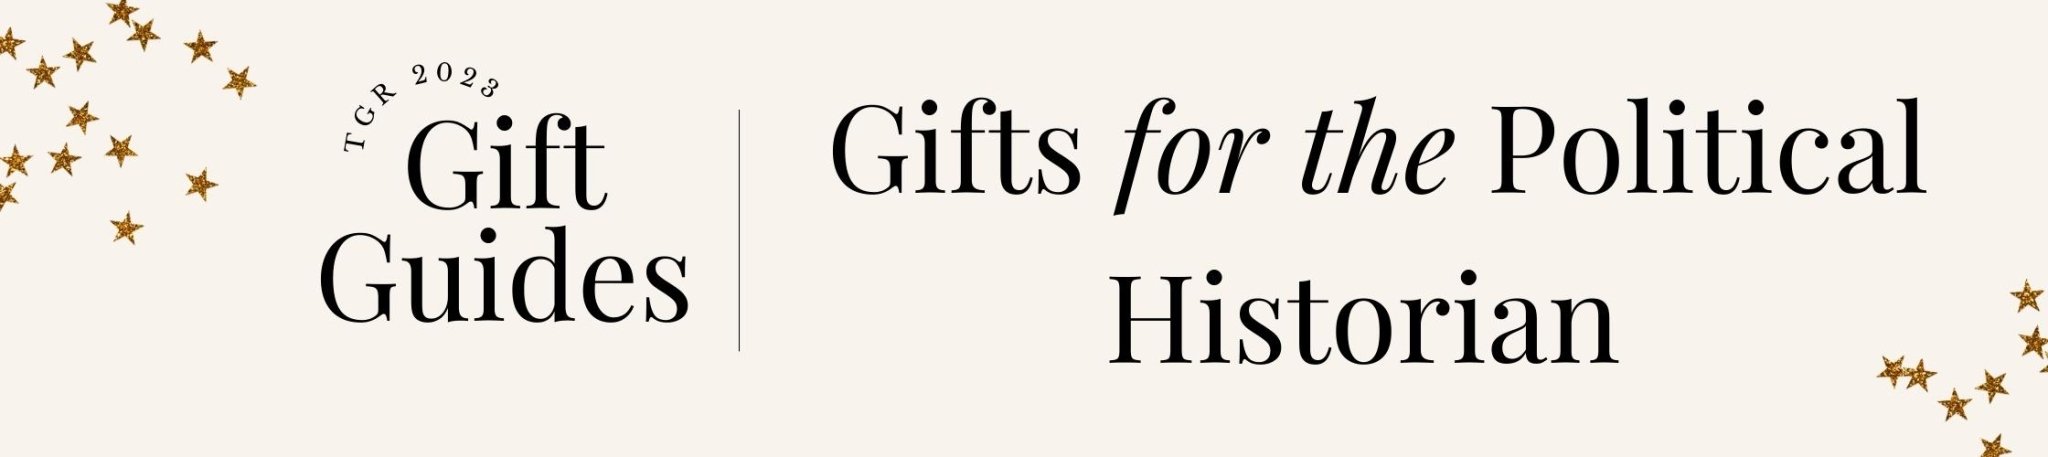 2023 Holiday Gift Guides: Gifts for the Political Historian - The Great Republic